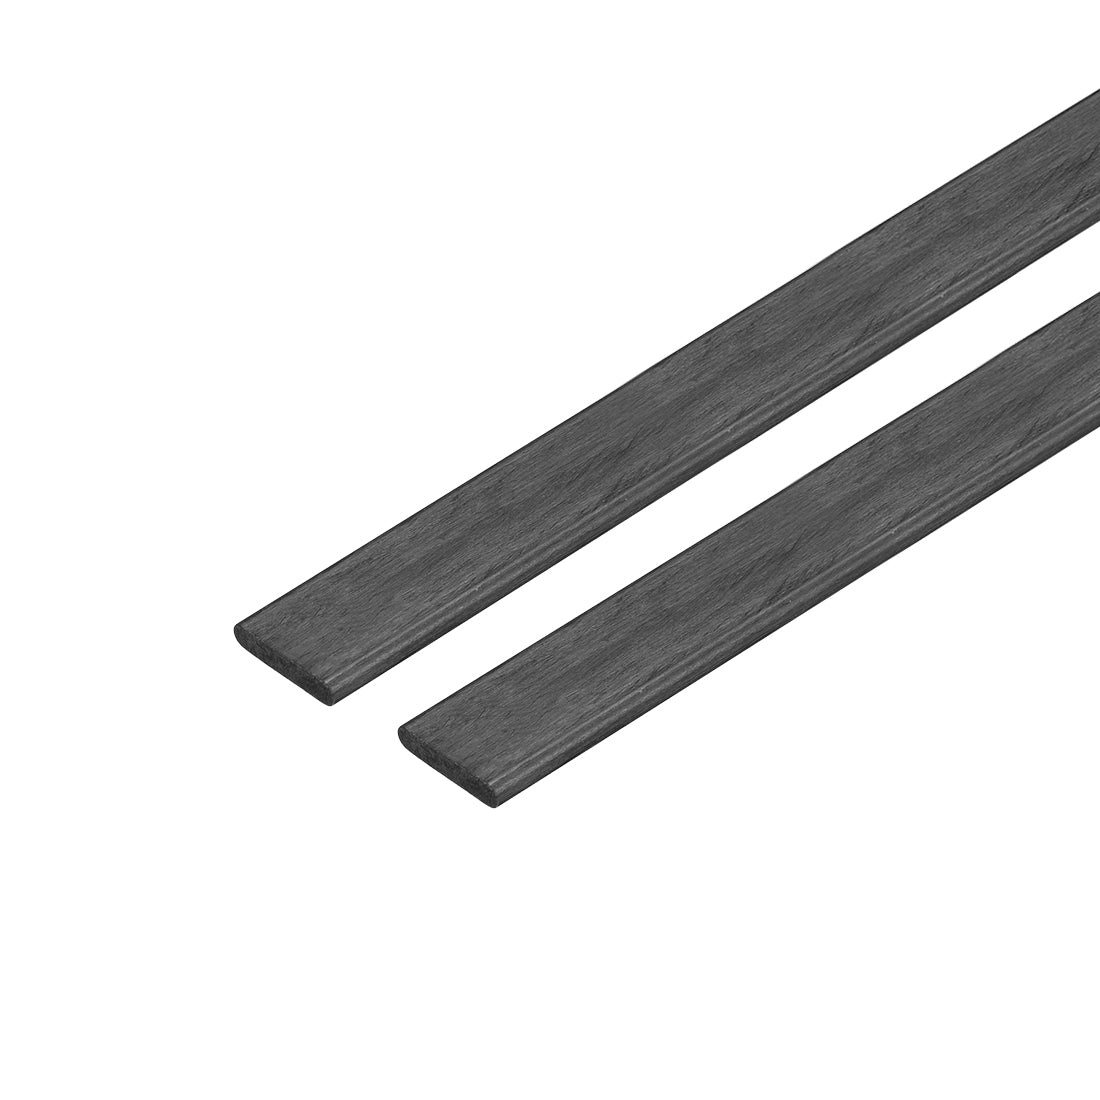 uxcell Uxcell Carbon Fiber Strip Bars 2x10mm 400mm Length Pultruded Carbon Fiber Strips for Kites, RC Airplane 2 Pcs